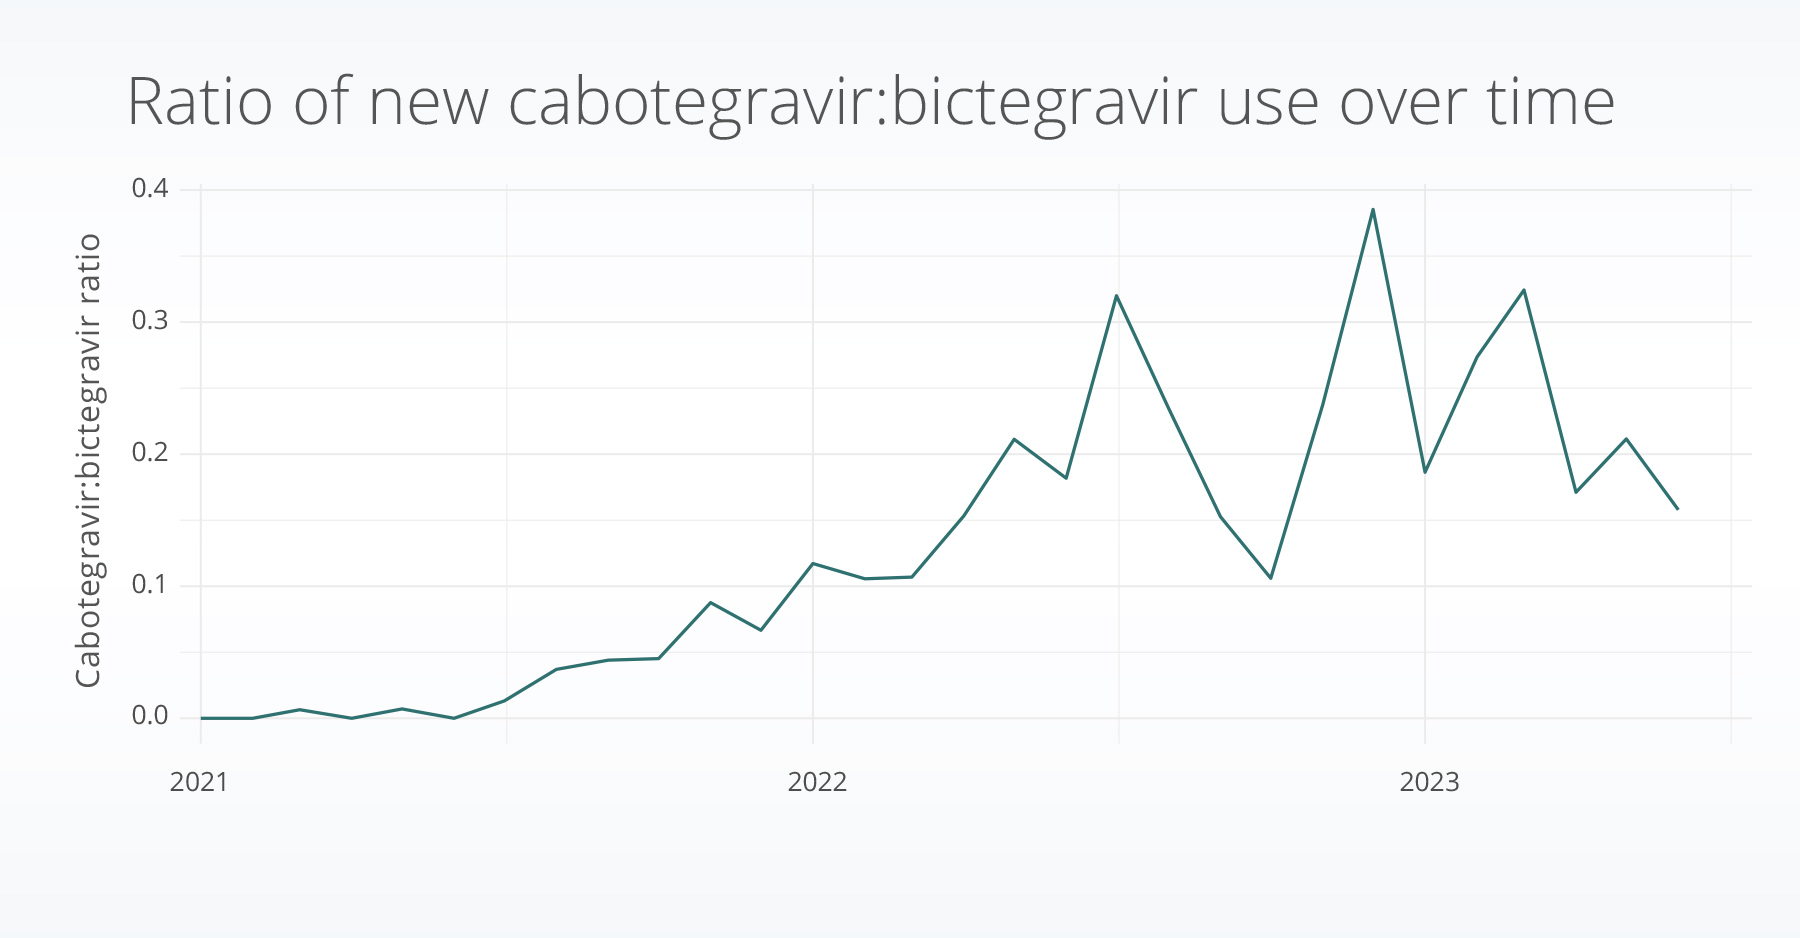 Ratio of cabotegravir to bictegravir prescriptions over time for patients with HIV